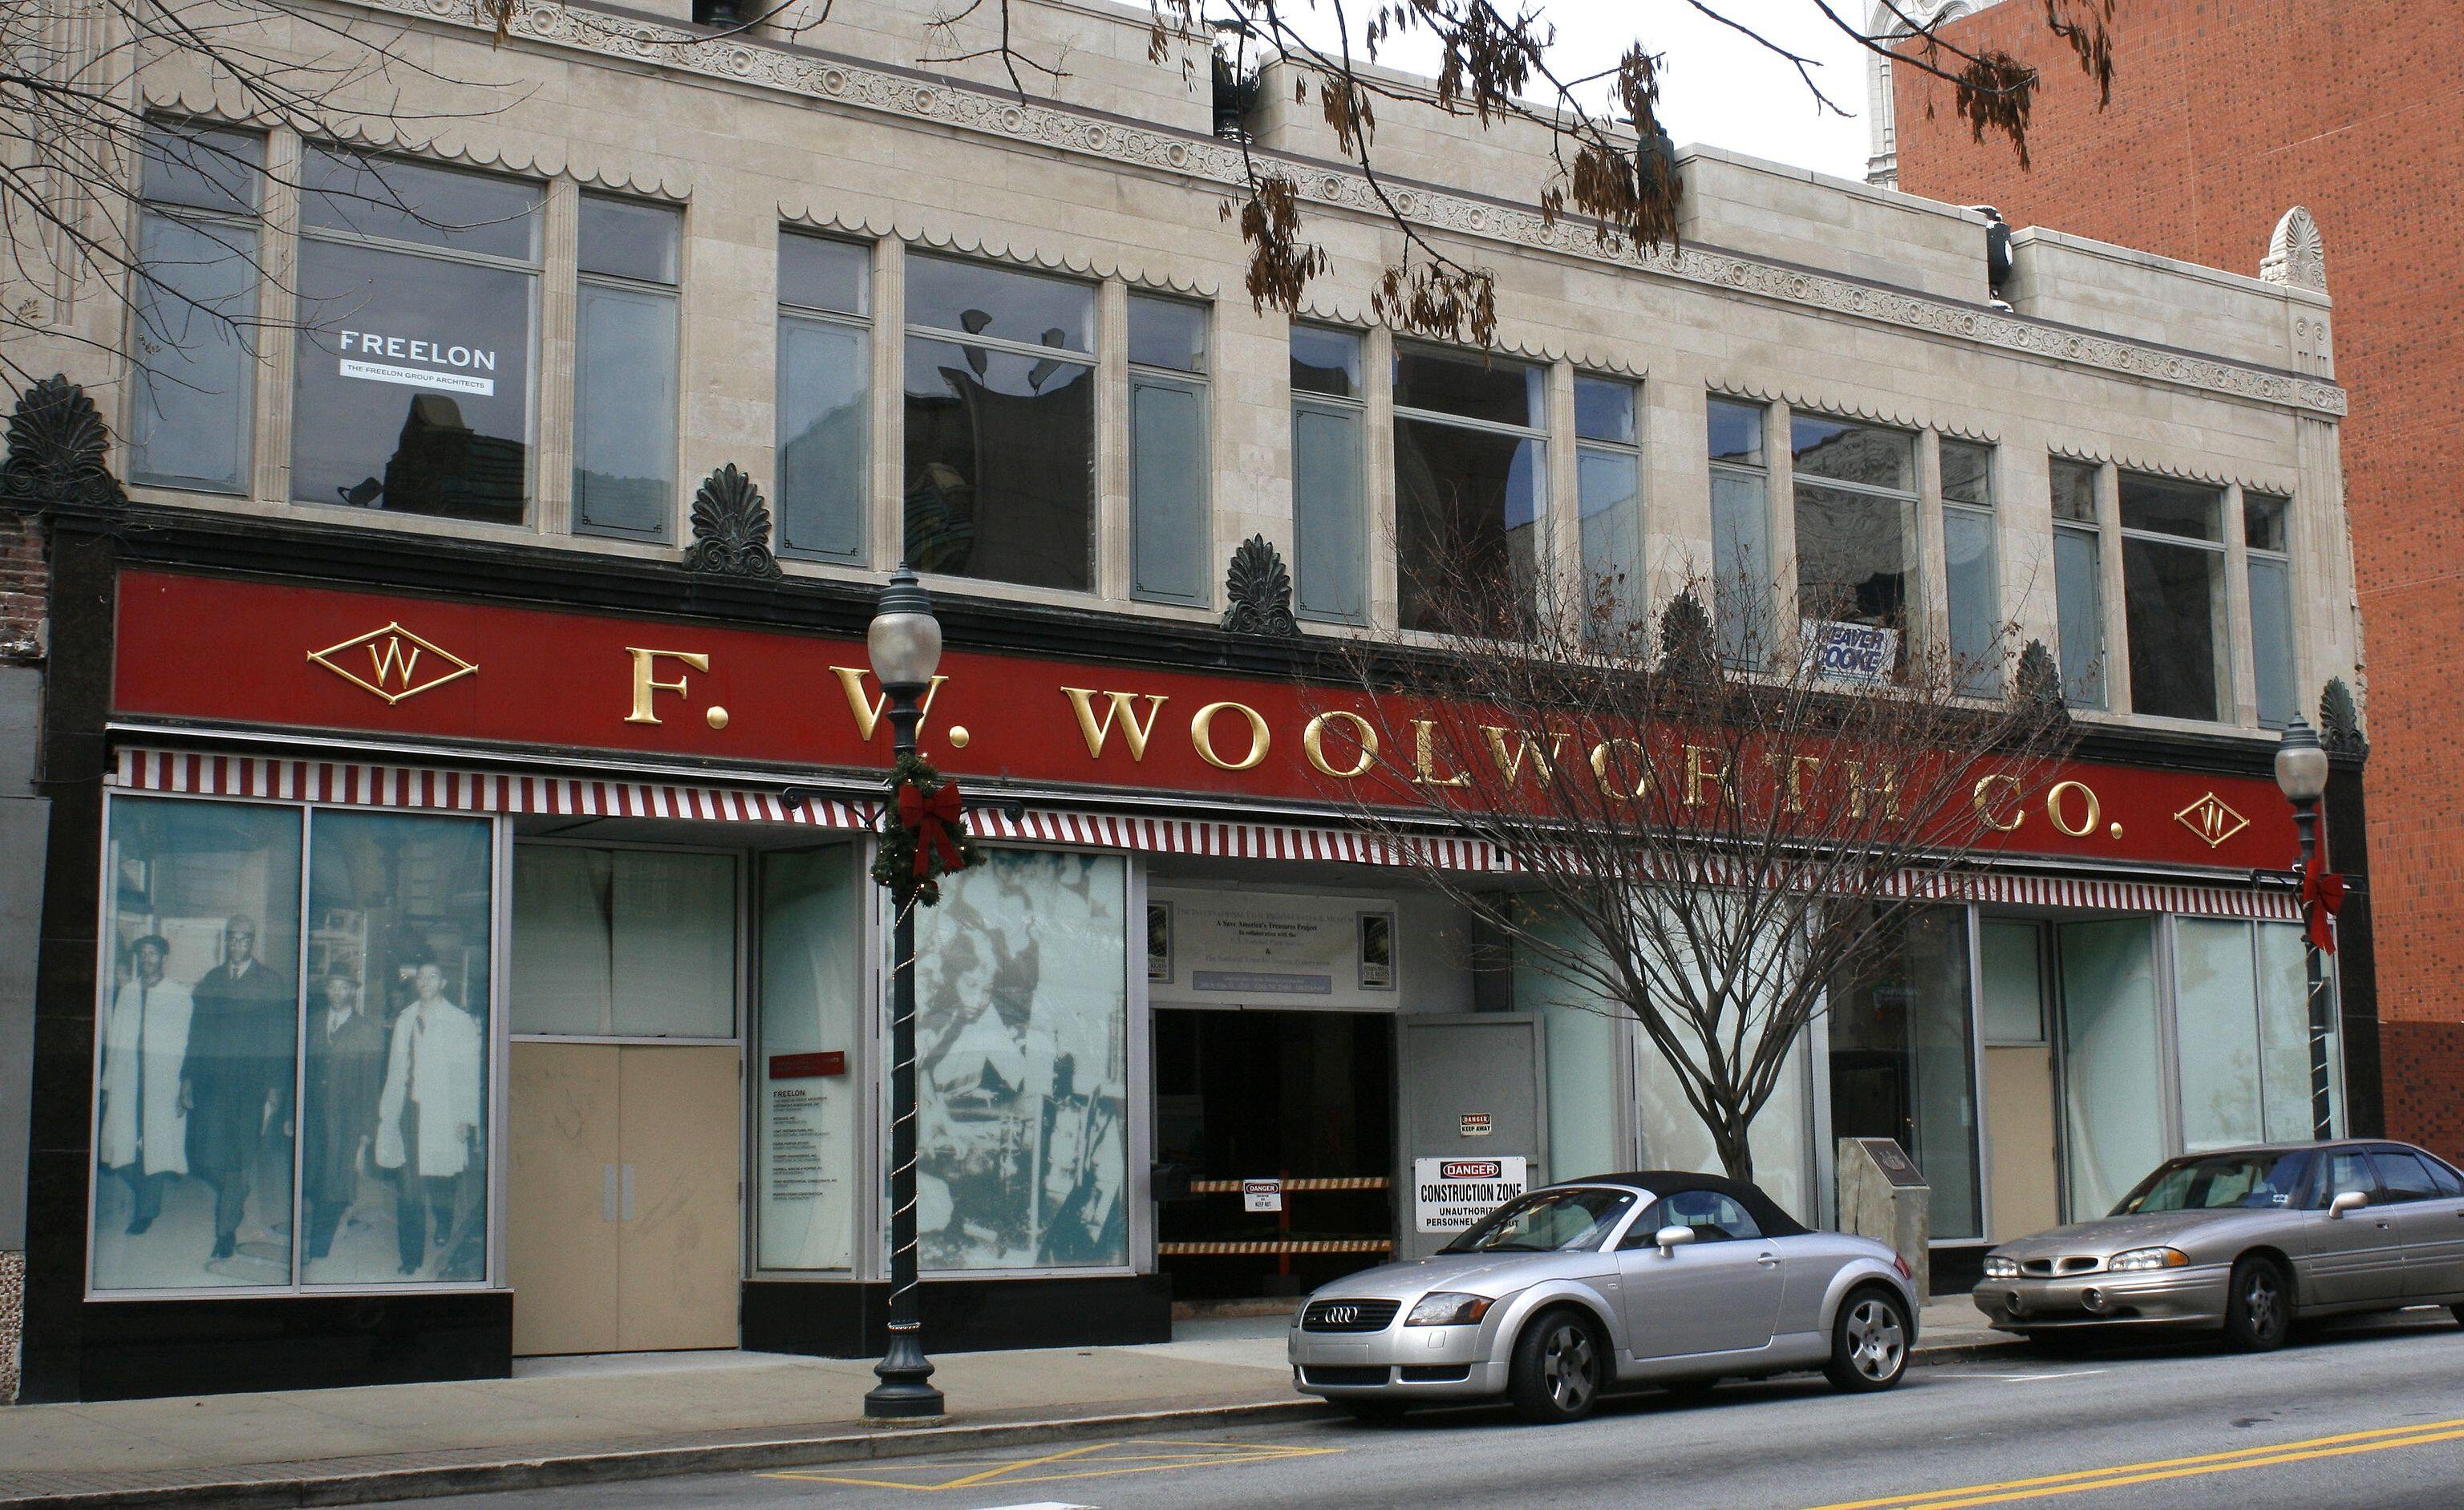 Former F. W. Woolworth Co. store in Greensboro, North Carolina, the site of a now-famous "sit-in" protest by black college students in 1960.